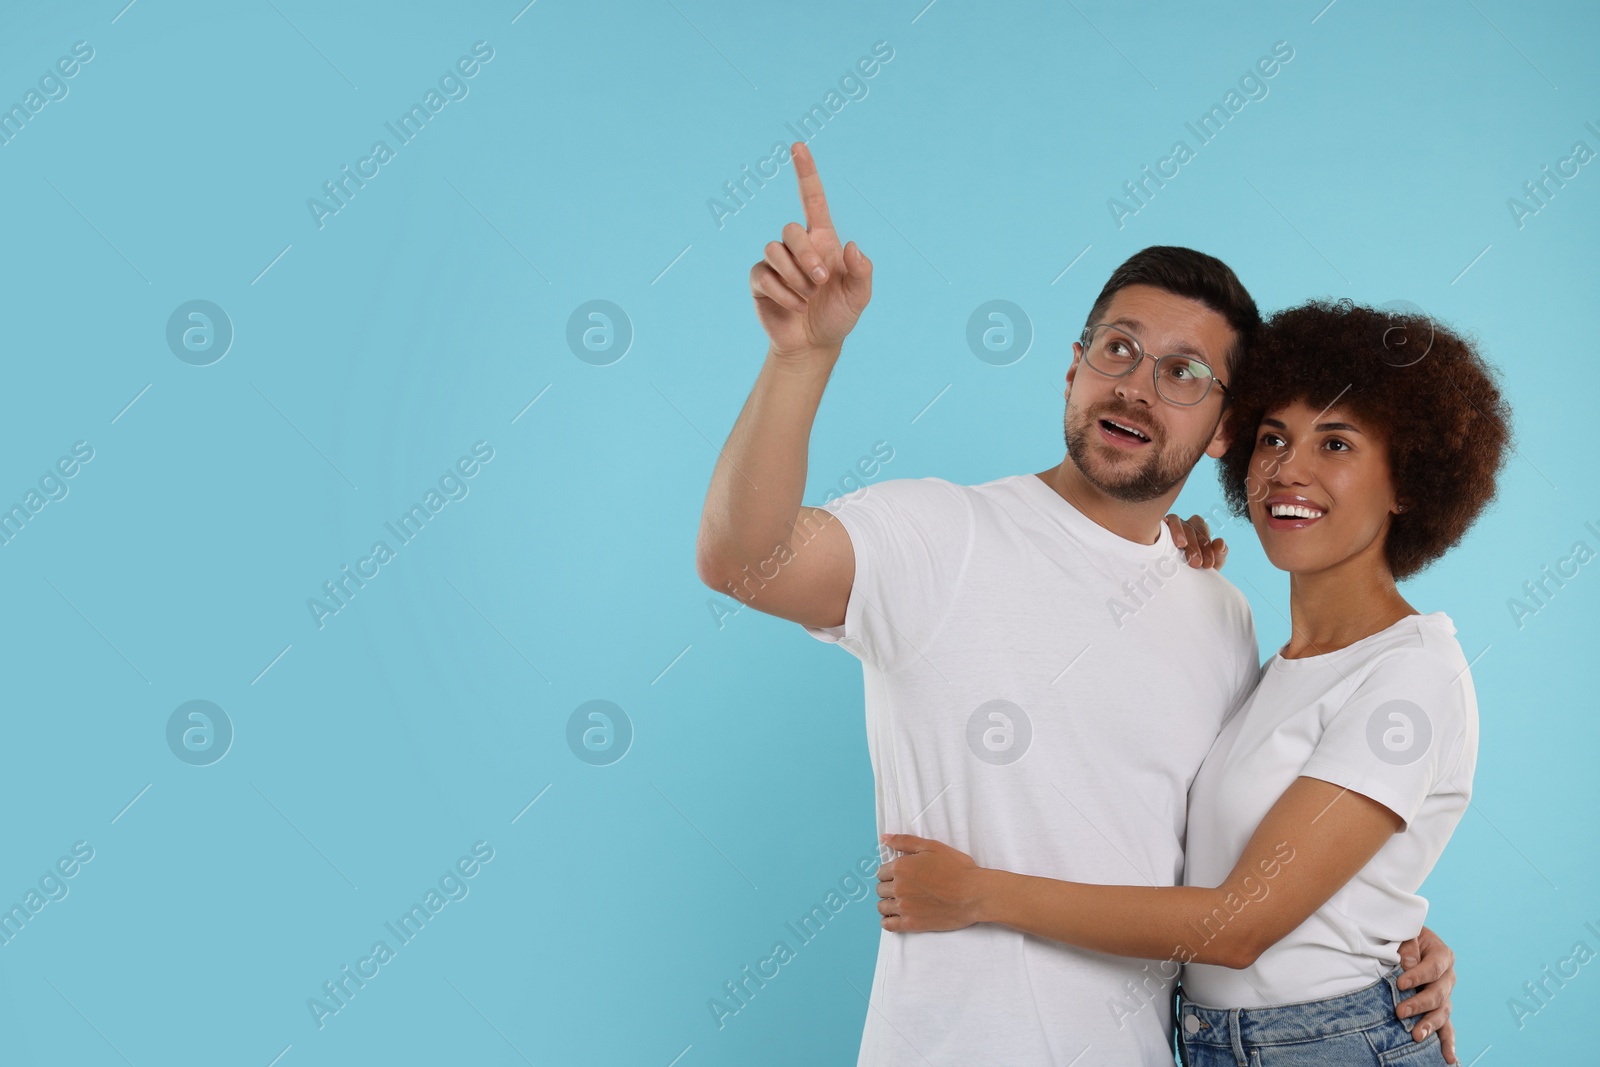 Photo of International dating. Lovely couple pointing at something on light blue background, space for text